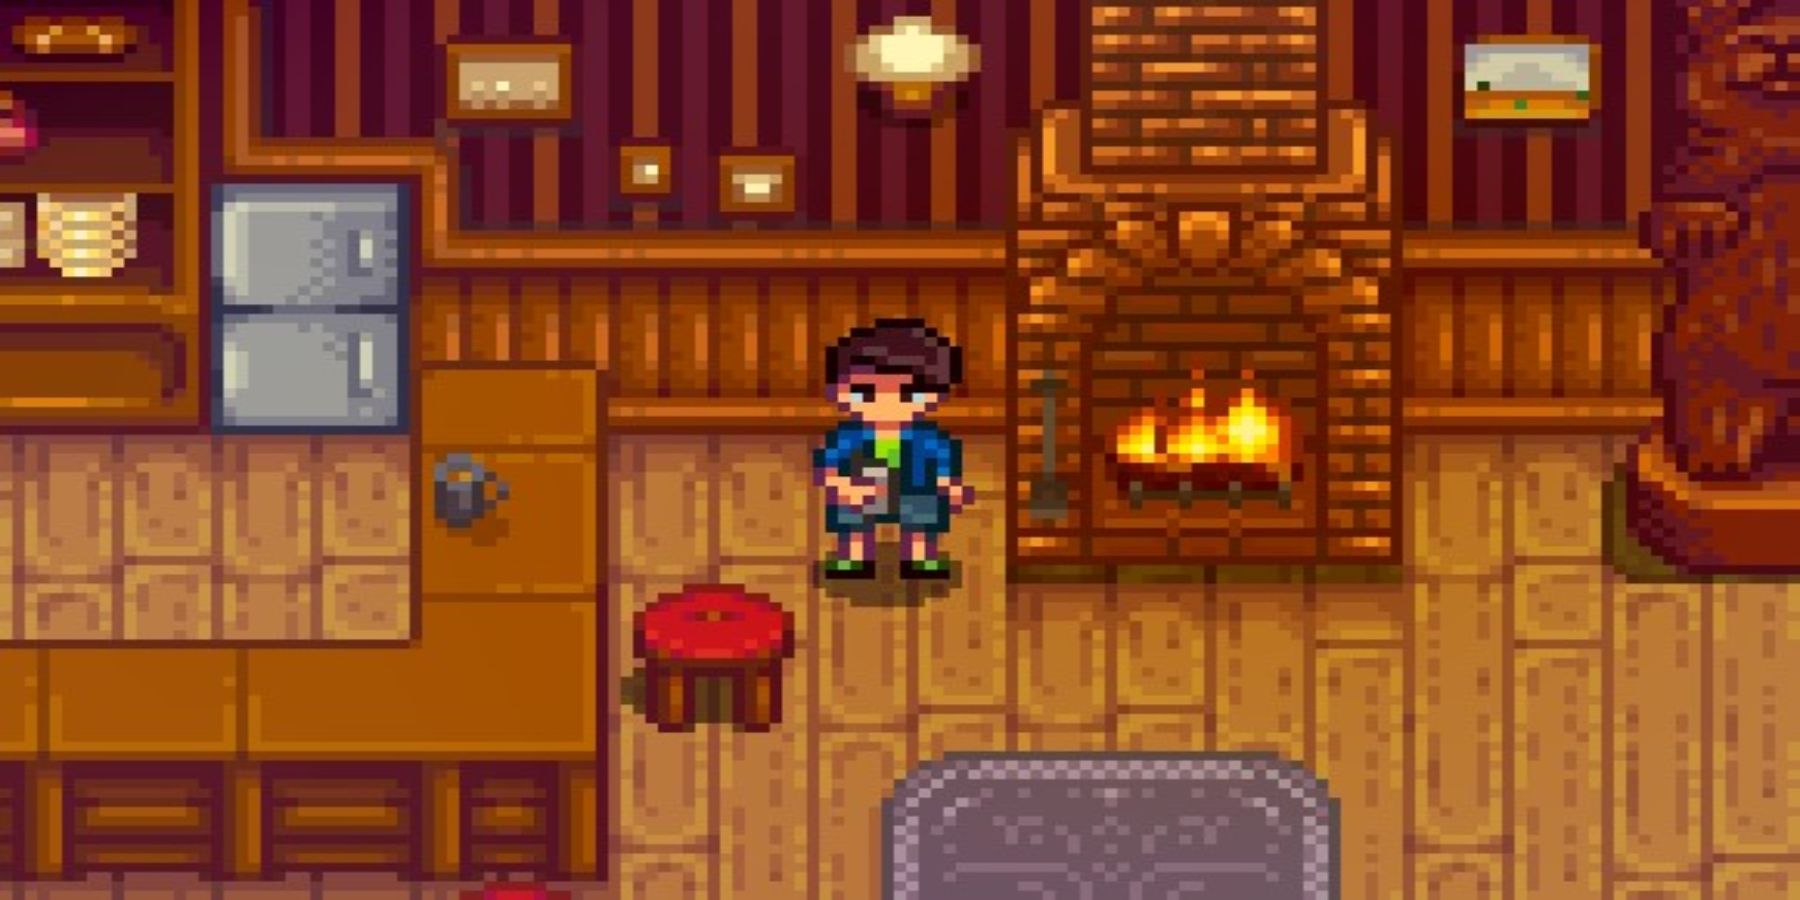 Shane in the saloon drinking Joja Cola next to the fire